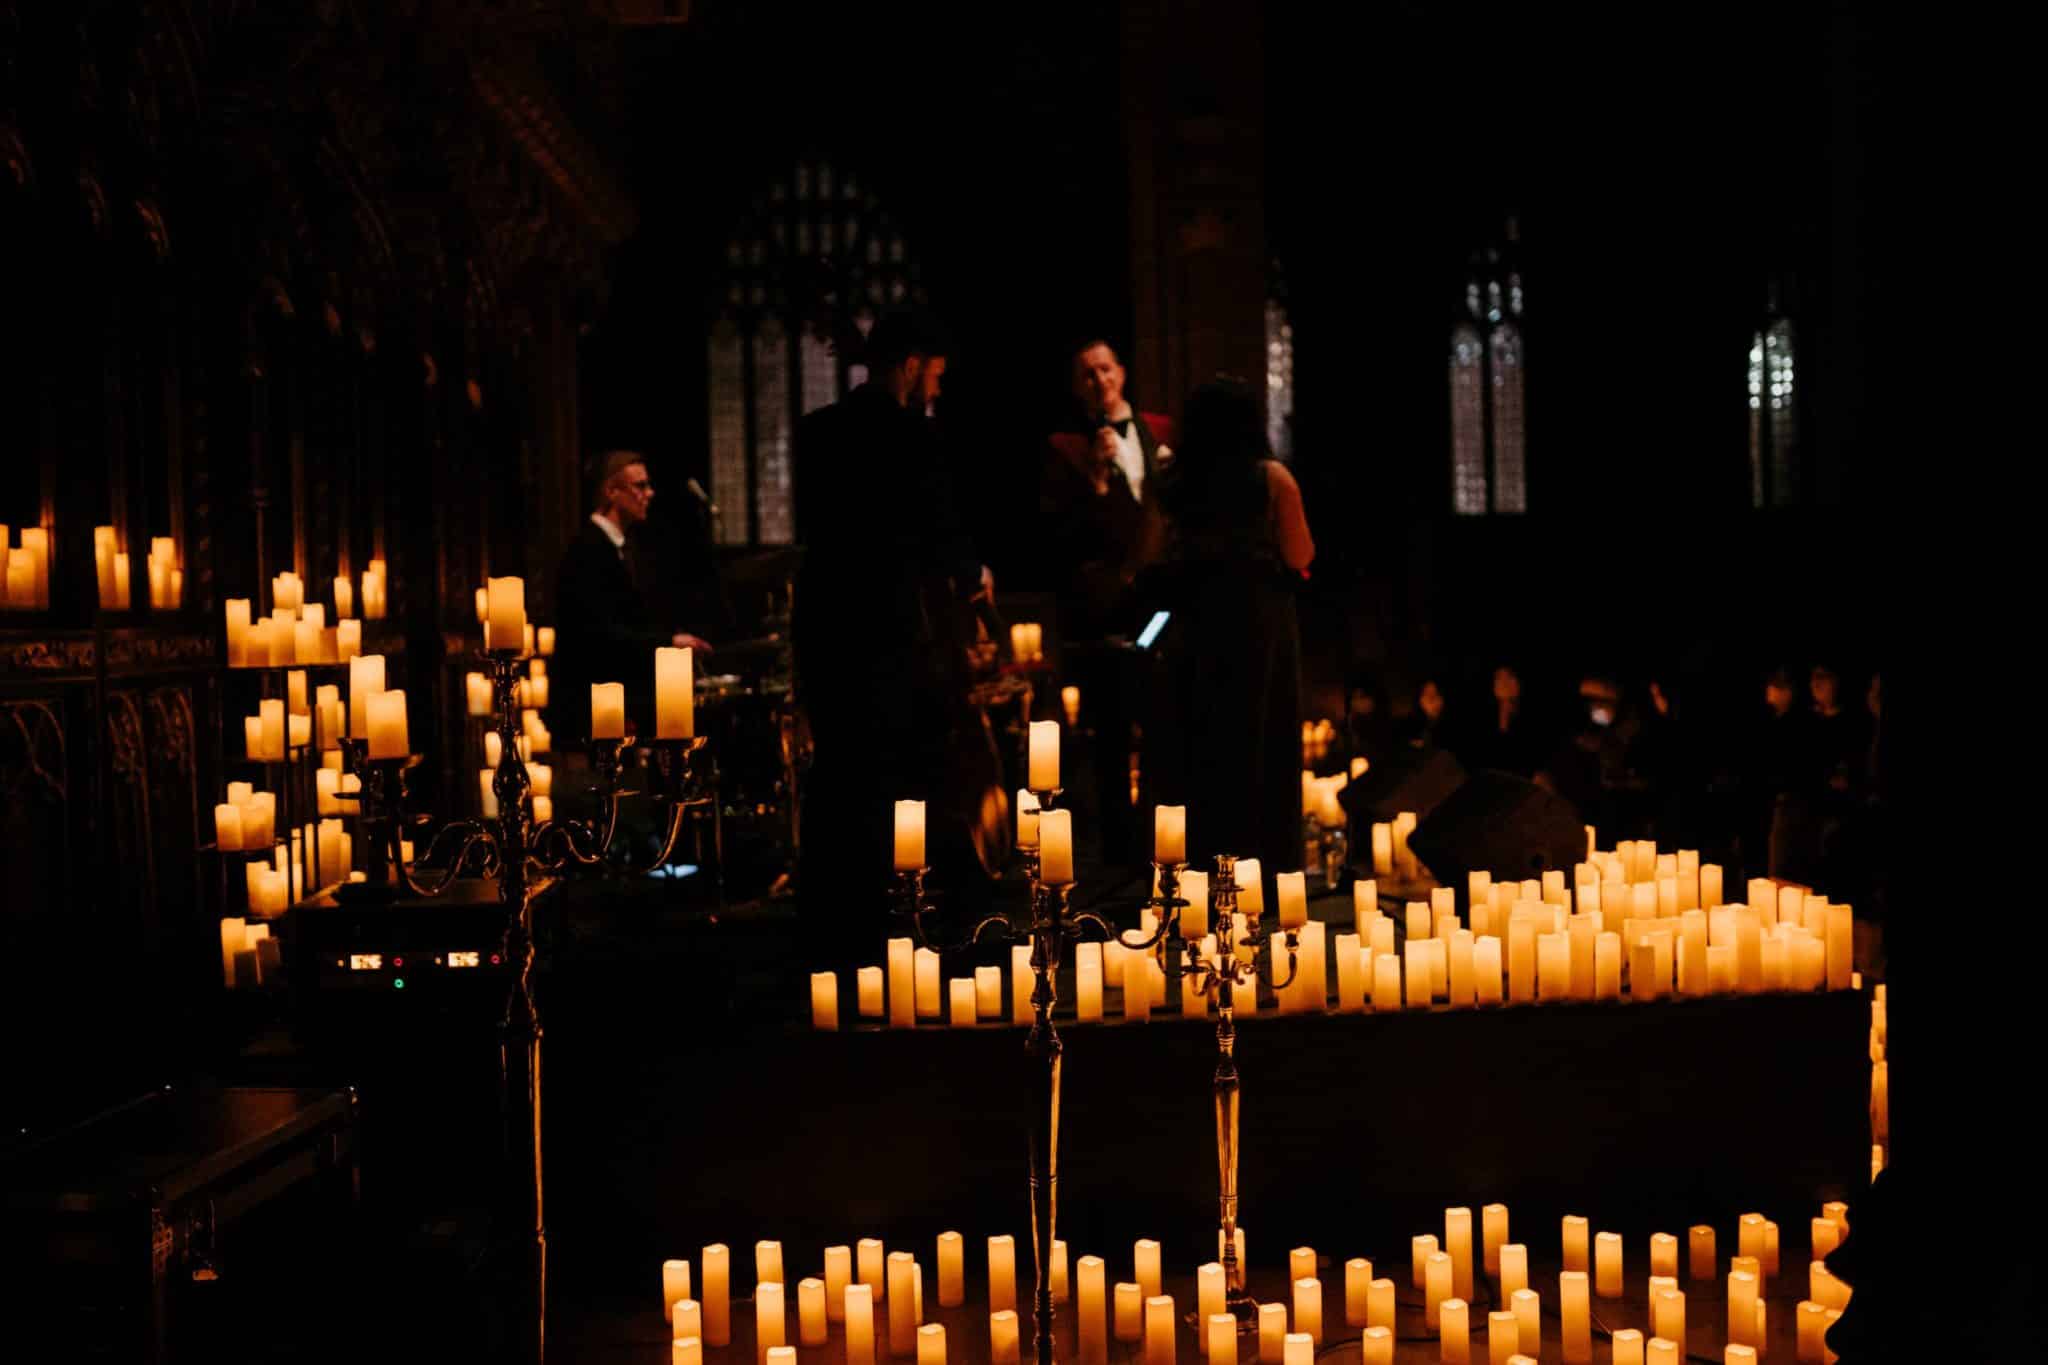 A dark image taken inside Manchester Cathedral showing candles on display and musicians preparing for a performance.